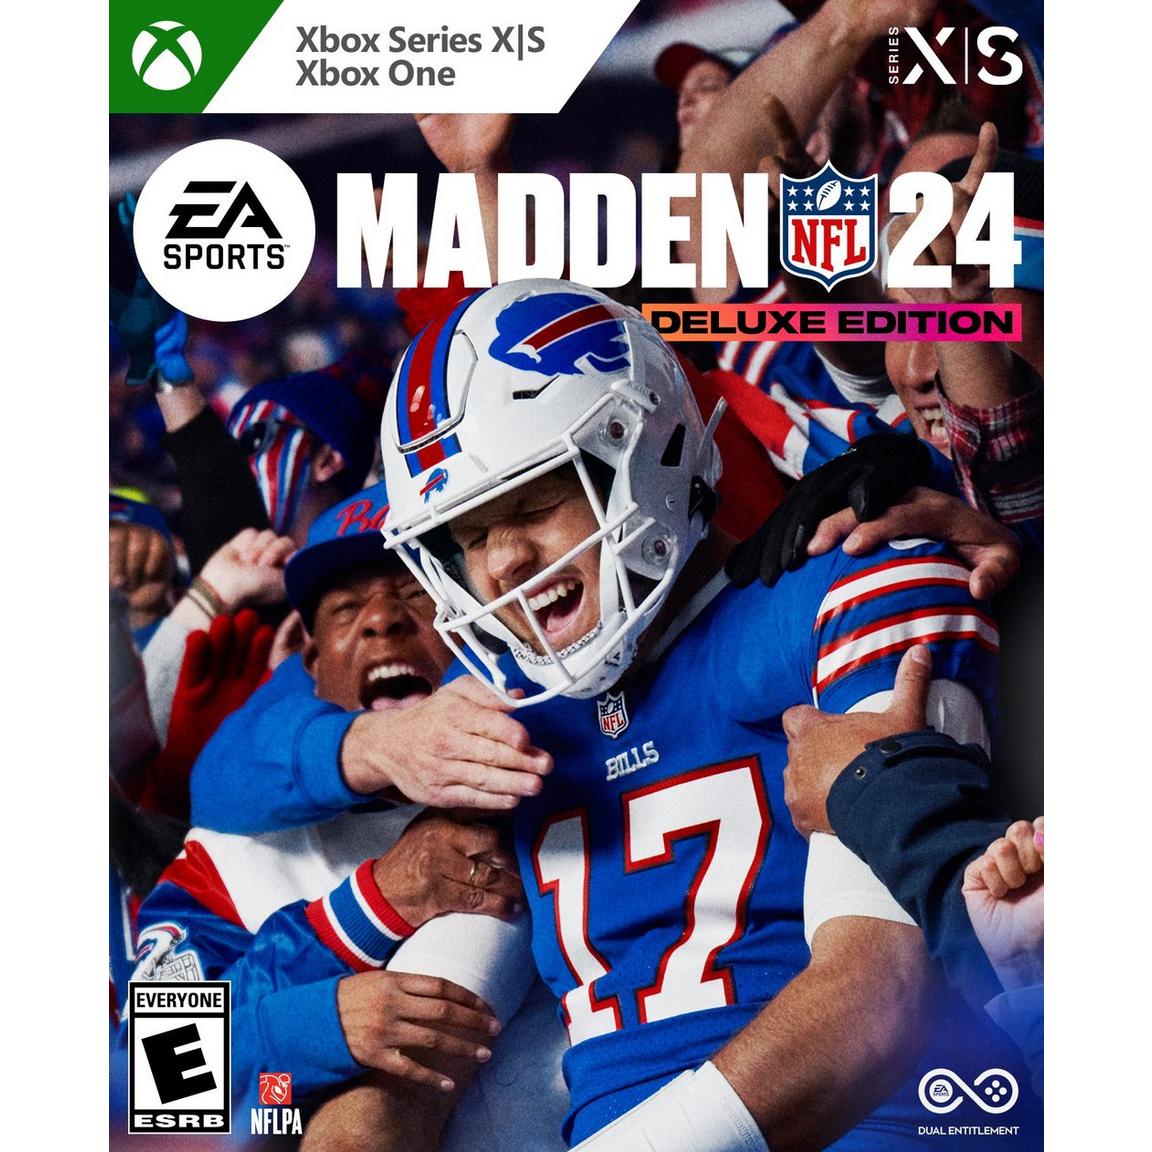 Madden NFL 24: Deluxe Edition - Xbox Series X/S and Xbox One -  Electronic Arts, 7D4-00704